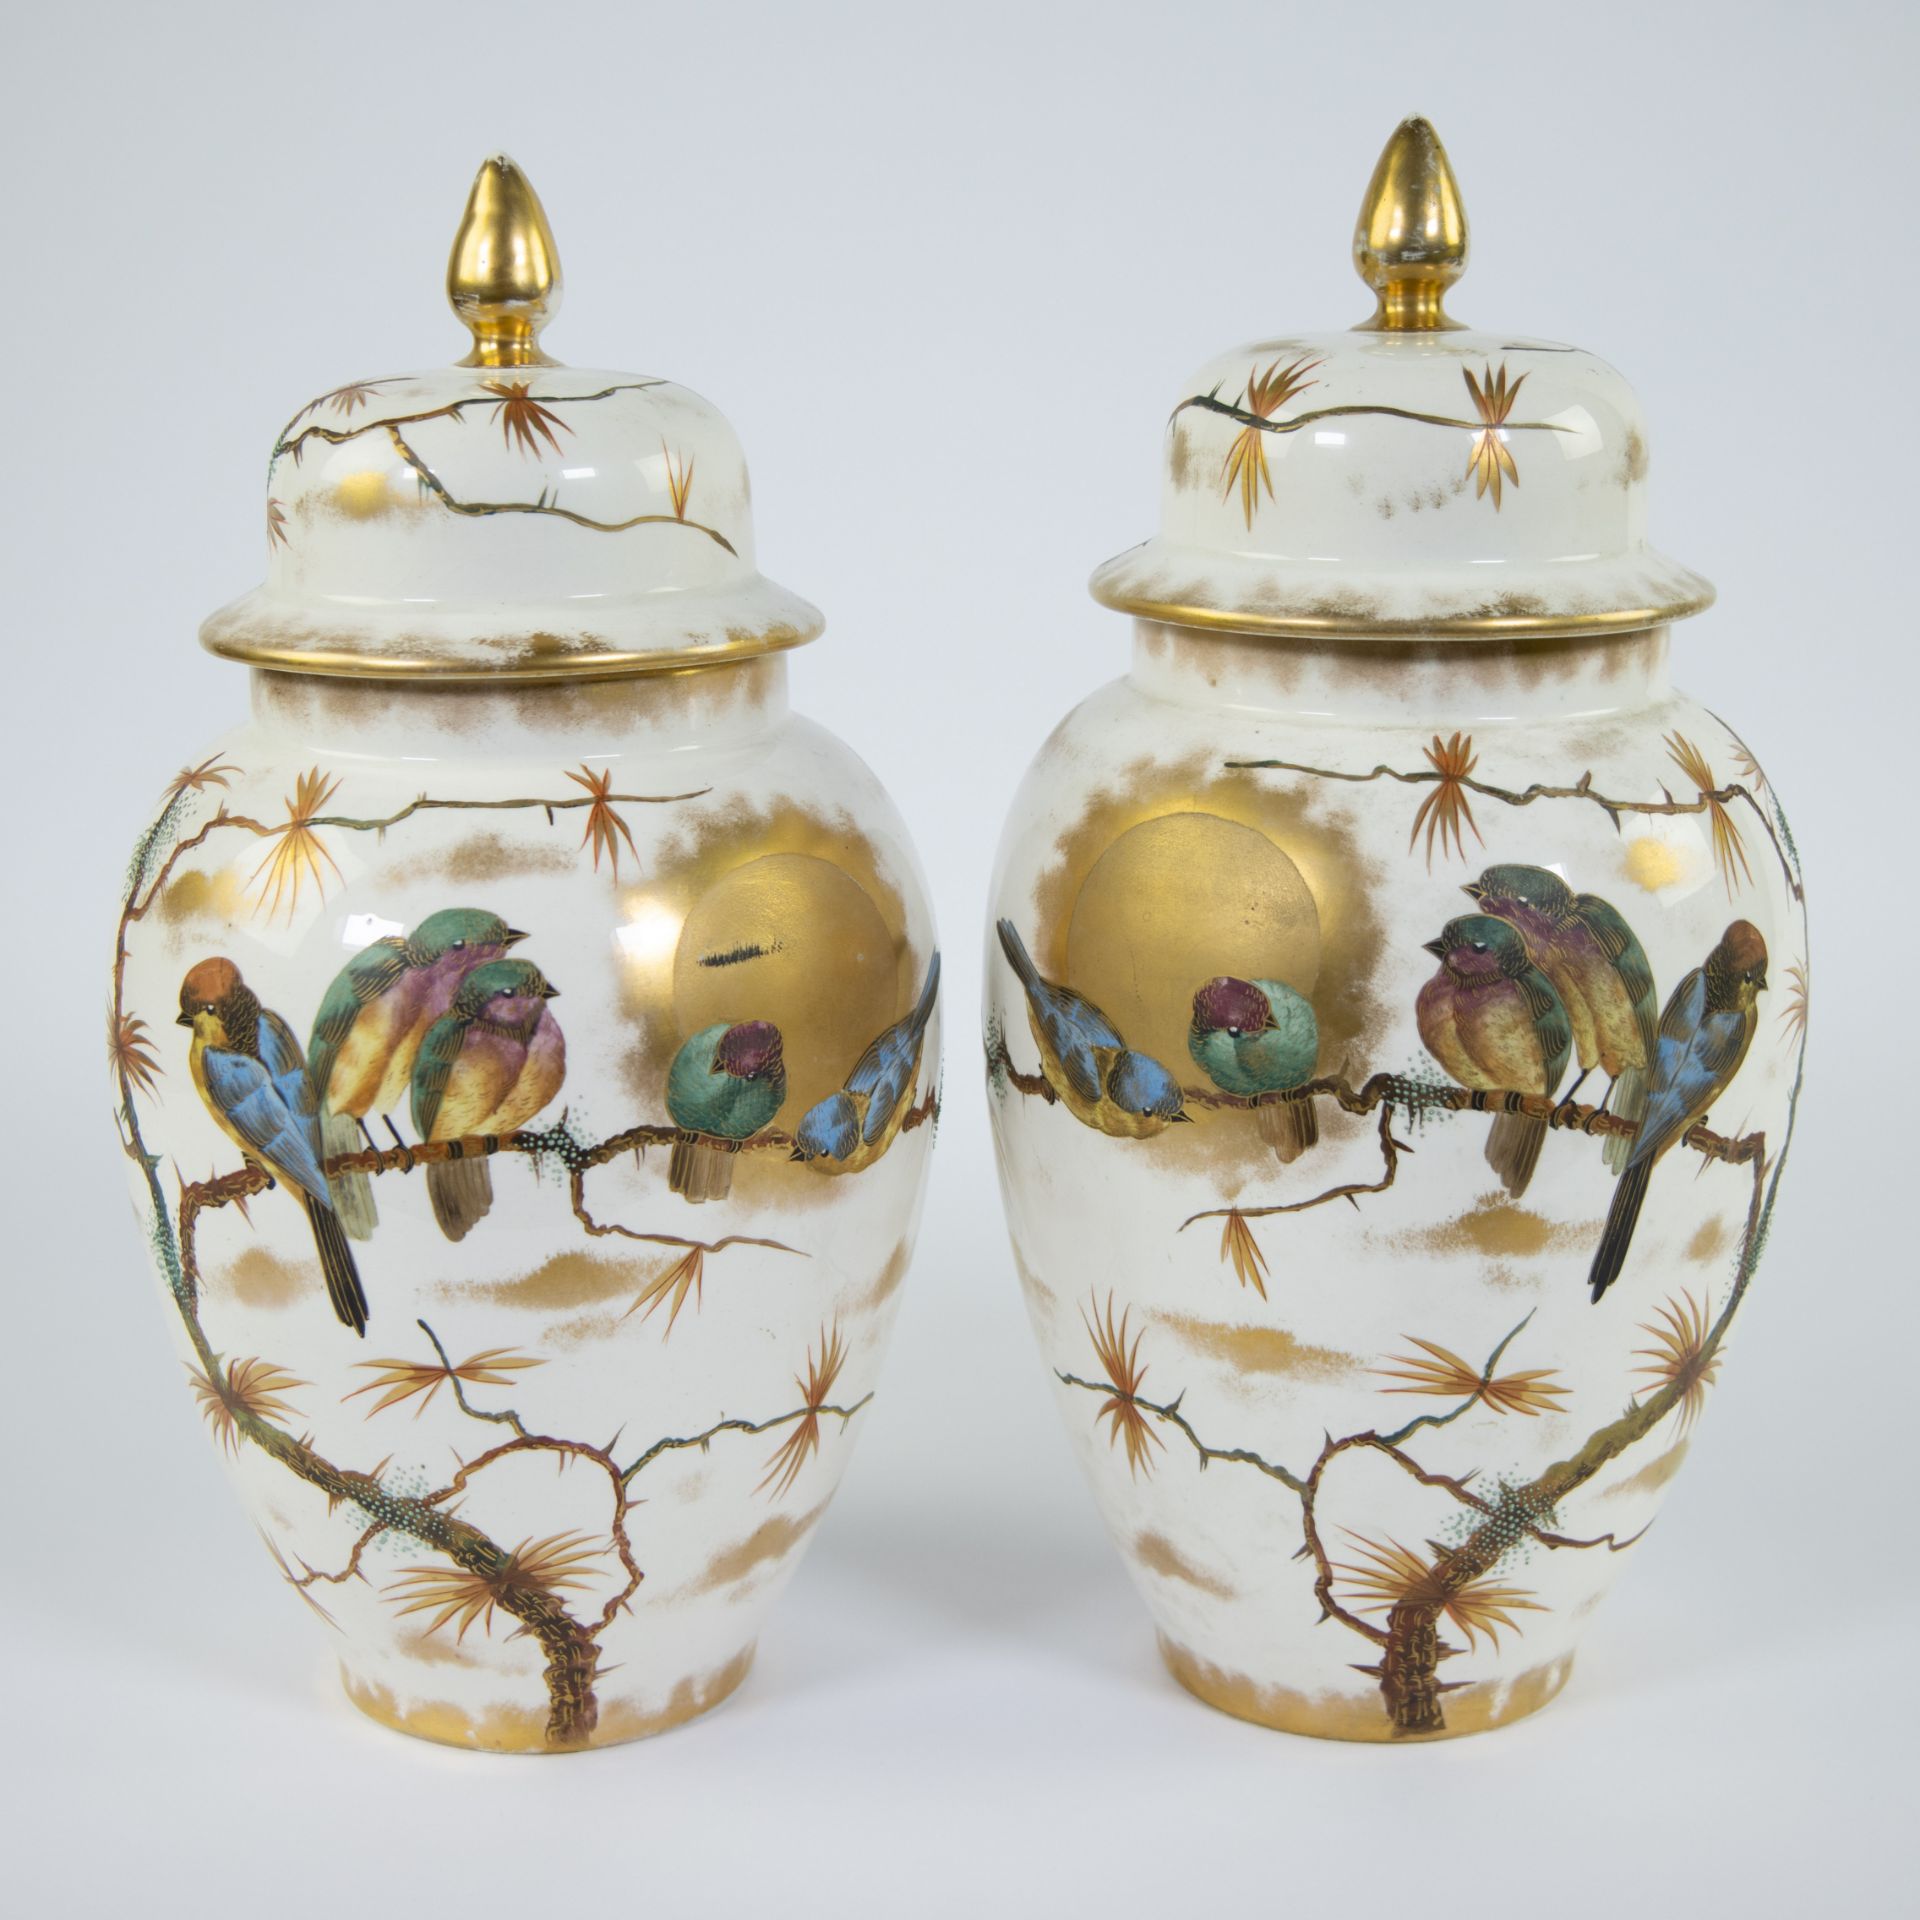 Pair of German lidded vases with fine decorated decoration of birds, marked